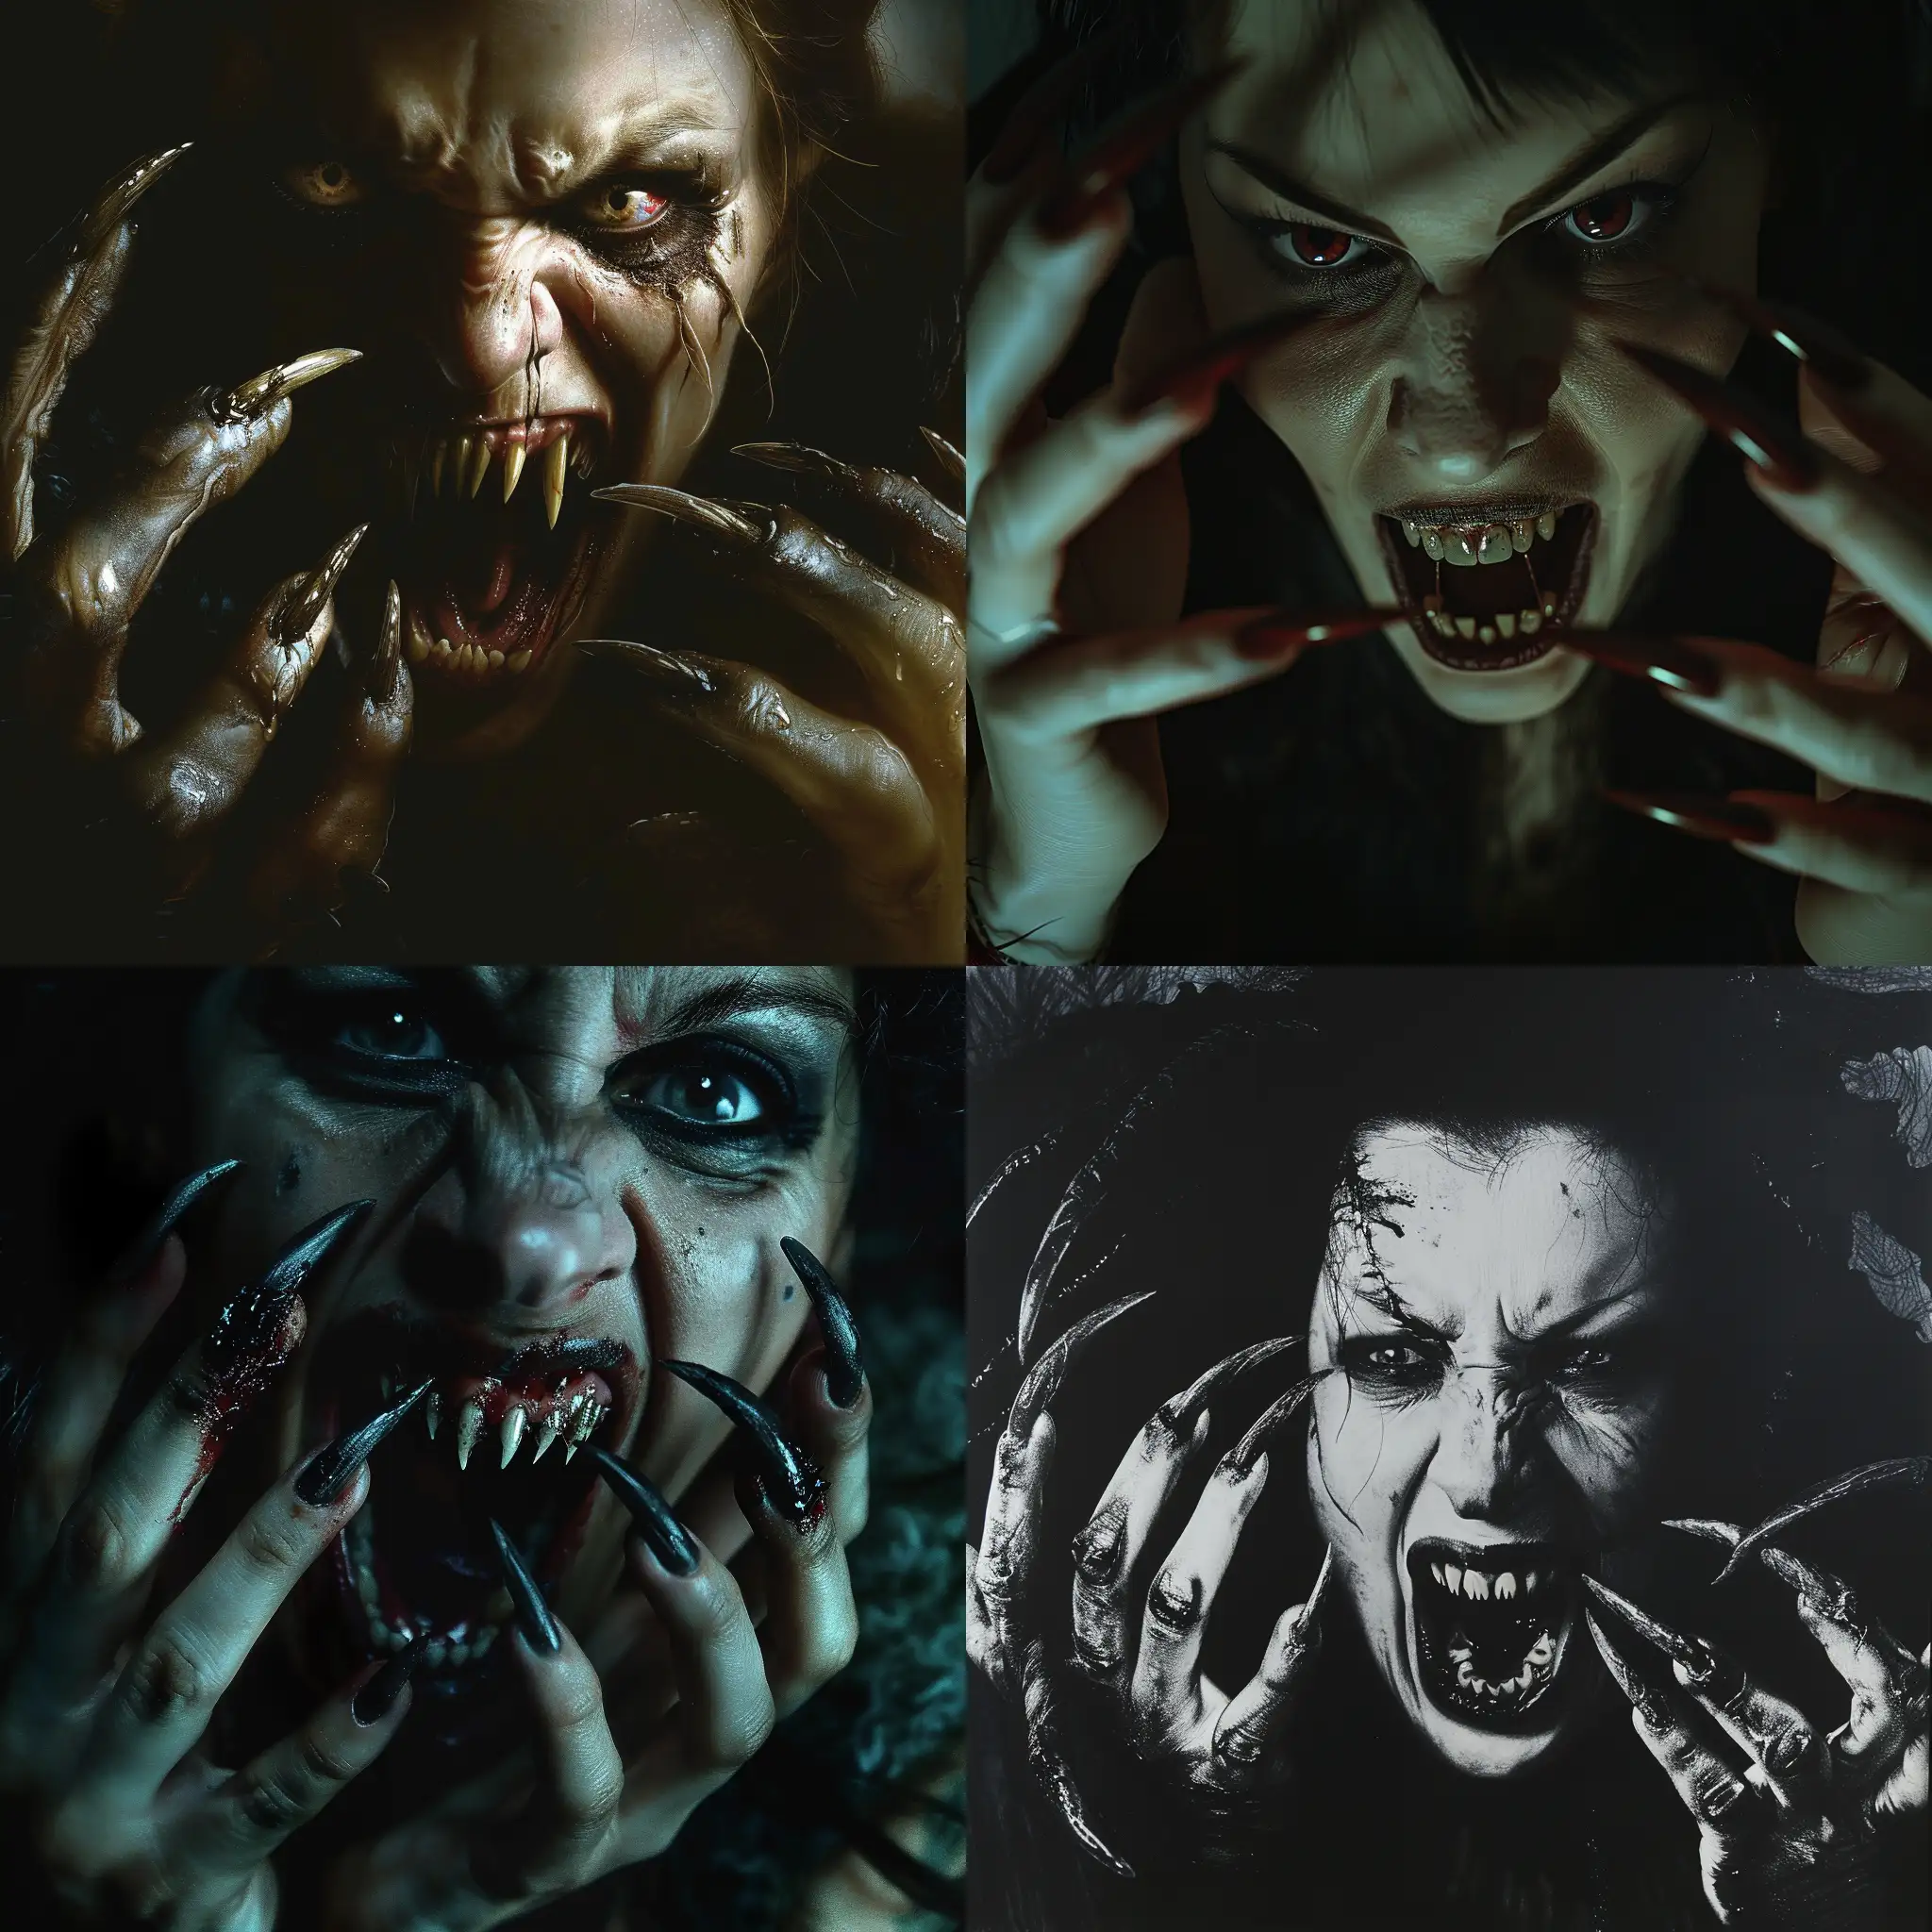 Subject: The main subject of the image is a wild and ugly vampire woman, depicted in a photorealistic style. She has extra long pointed fingernails resembling claws, and her mouth is open with fang-like teeth, giving her a threatening appearance.  Setting: The scene is set inside a dark room, adding to the eerie atmosphere. The darkness enhances the horror element and creates a cinematic feel.  Style/Coloring: The image is hyper-realistic with high detail and photo detailing, contributing to the photorealistic quality. The coloring is dark and haunting, with atmospheric lighting intensifying the creepy vibe.  Action/Items: The vampire woman appears to have just emerged from the darkness, adding a sense of suspense and fear. Her posture and expression convey aggression and terror.  Costume/Appearance: The vampire's appearance is grotesque and terrifying, with detailed nails and realistic anatomy, including five fingers on each hand. Her undead look suggests that she has climbed out of a grave.  Accessories: The vampire's only accessories are her long, pointed fingernails, which resemble the claws of a predator, enhancing her menacing appearance.